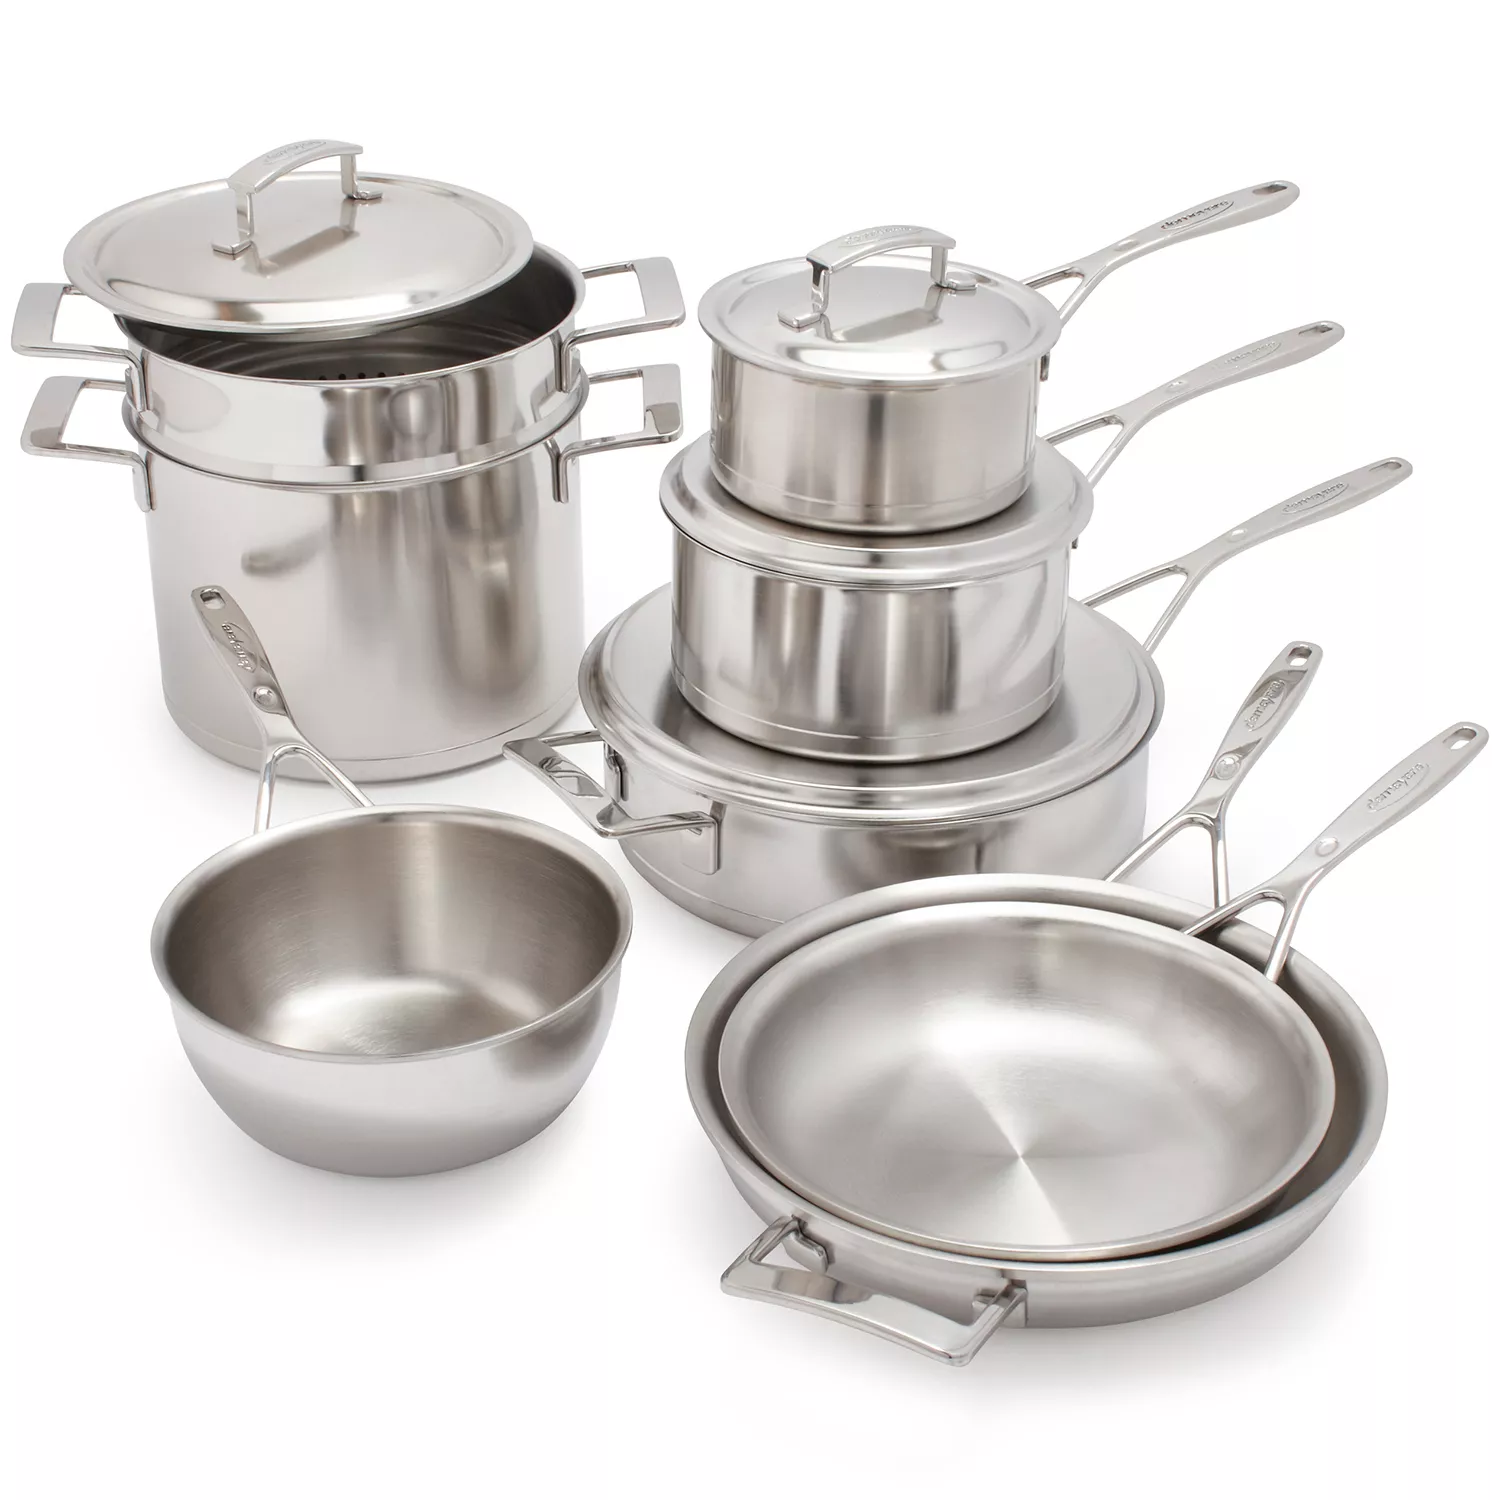 W Home 12-piece induction ready stainless steel cookware sets with